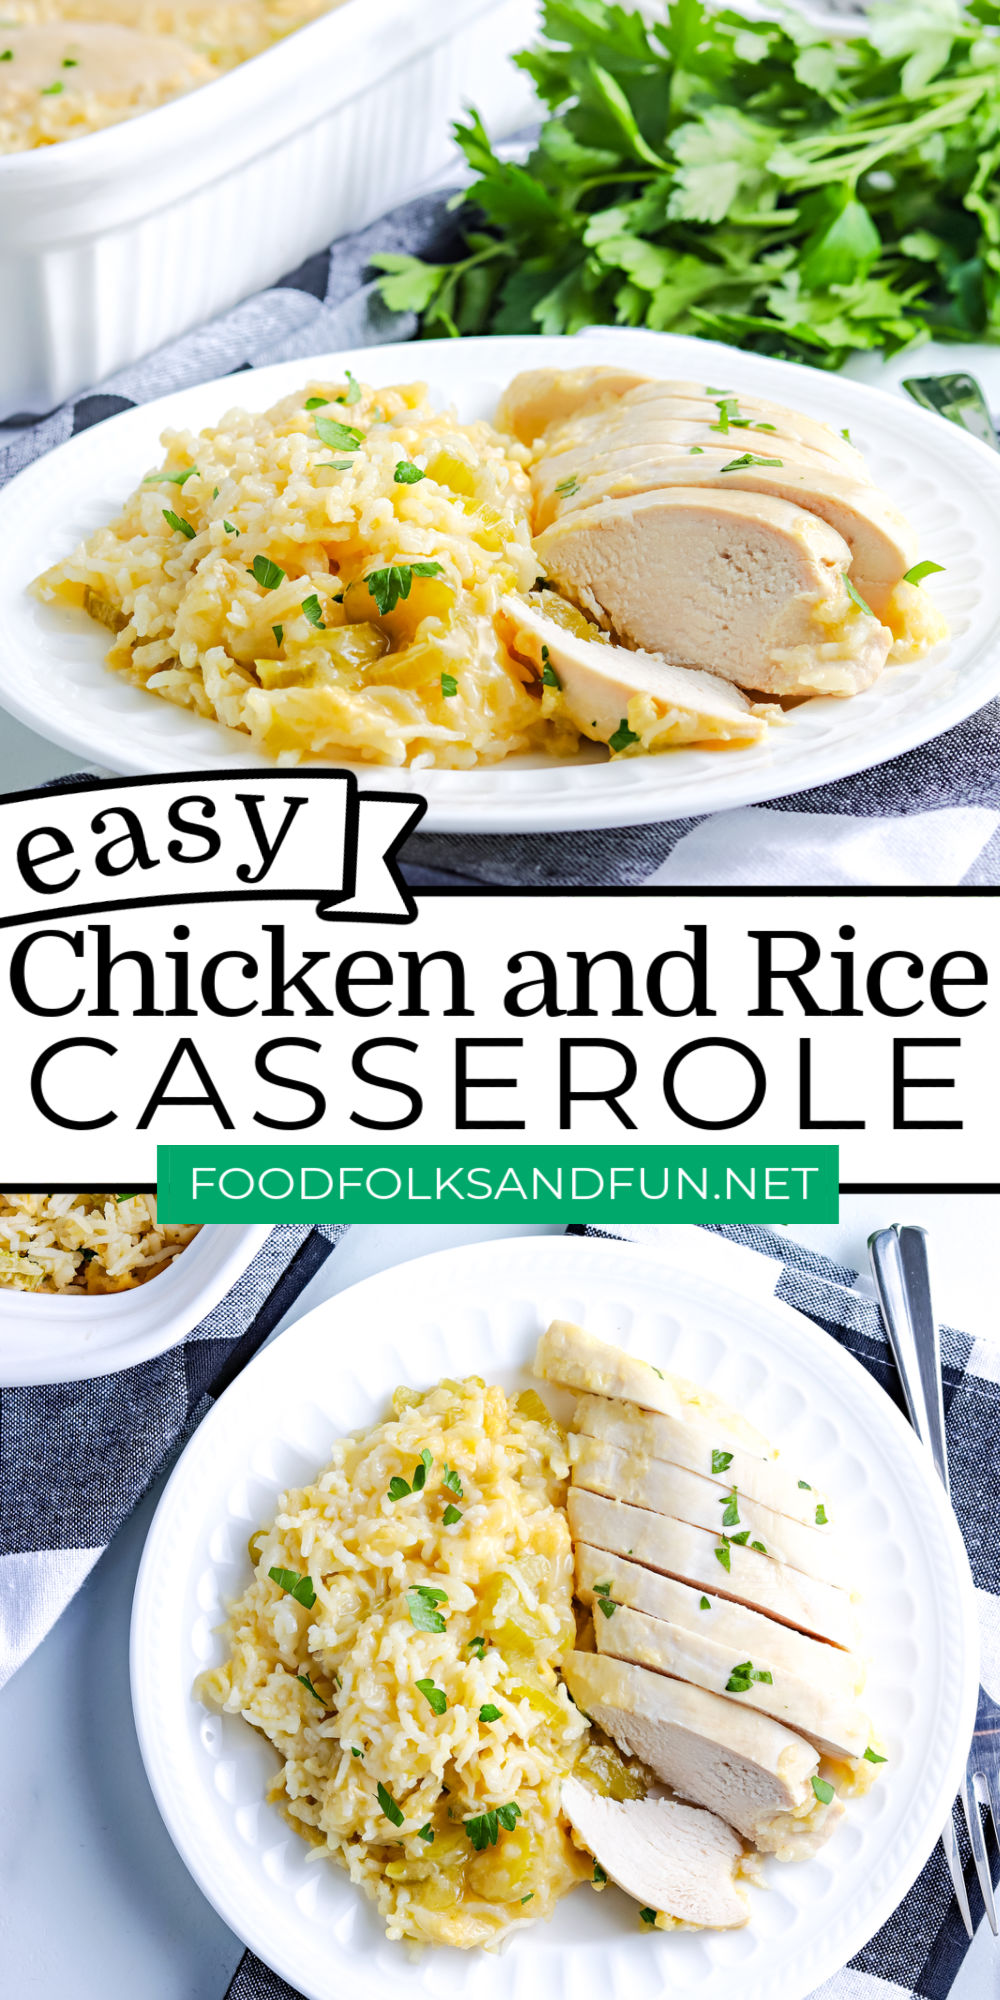 This Old School Chicken and Rice Casserole is a classic for a reason. The rice and chicken are deliciously seasoned and the rice cooks up perfectly. Dinner doesn’t get any easier than this Chicken Rice Casserole! via @foodfolksandfun